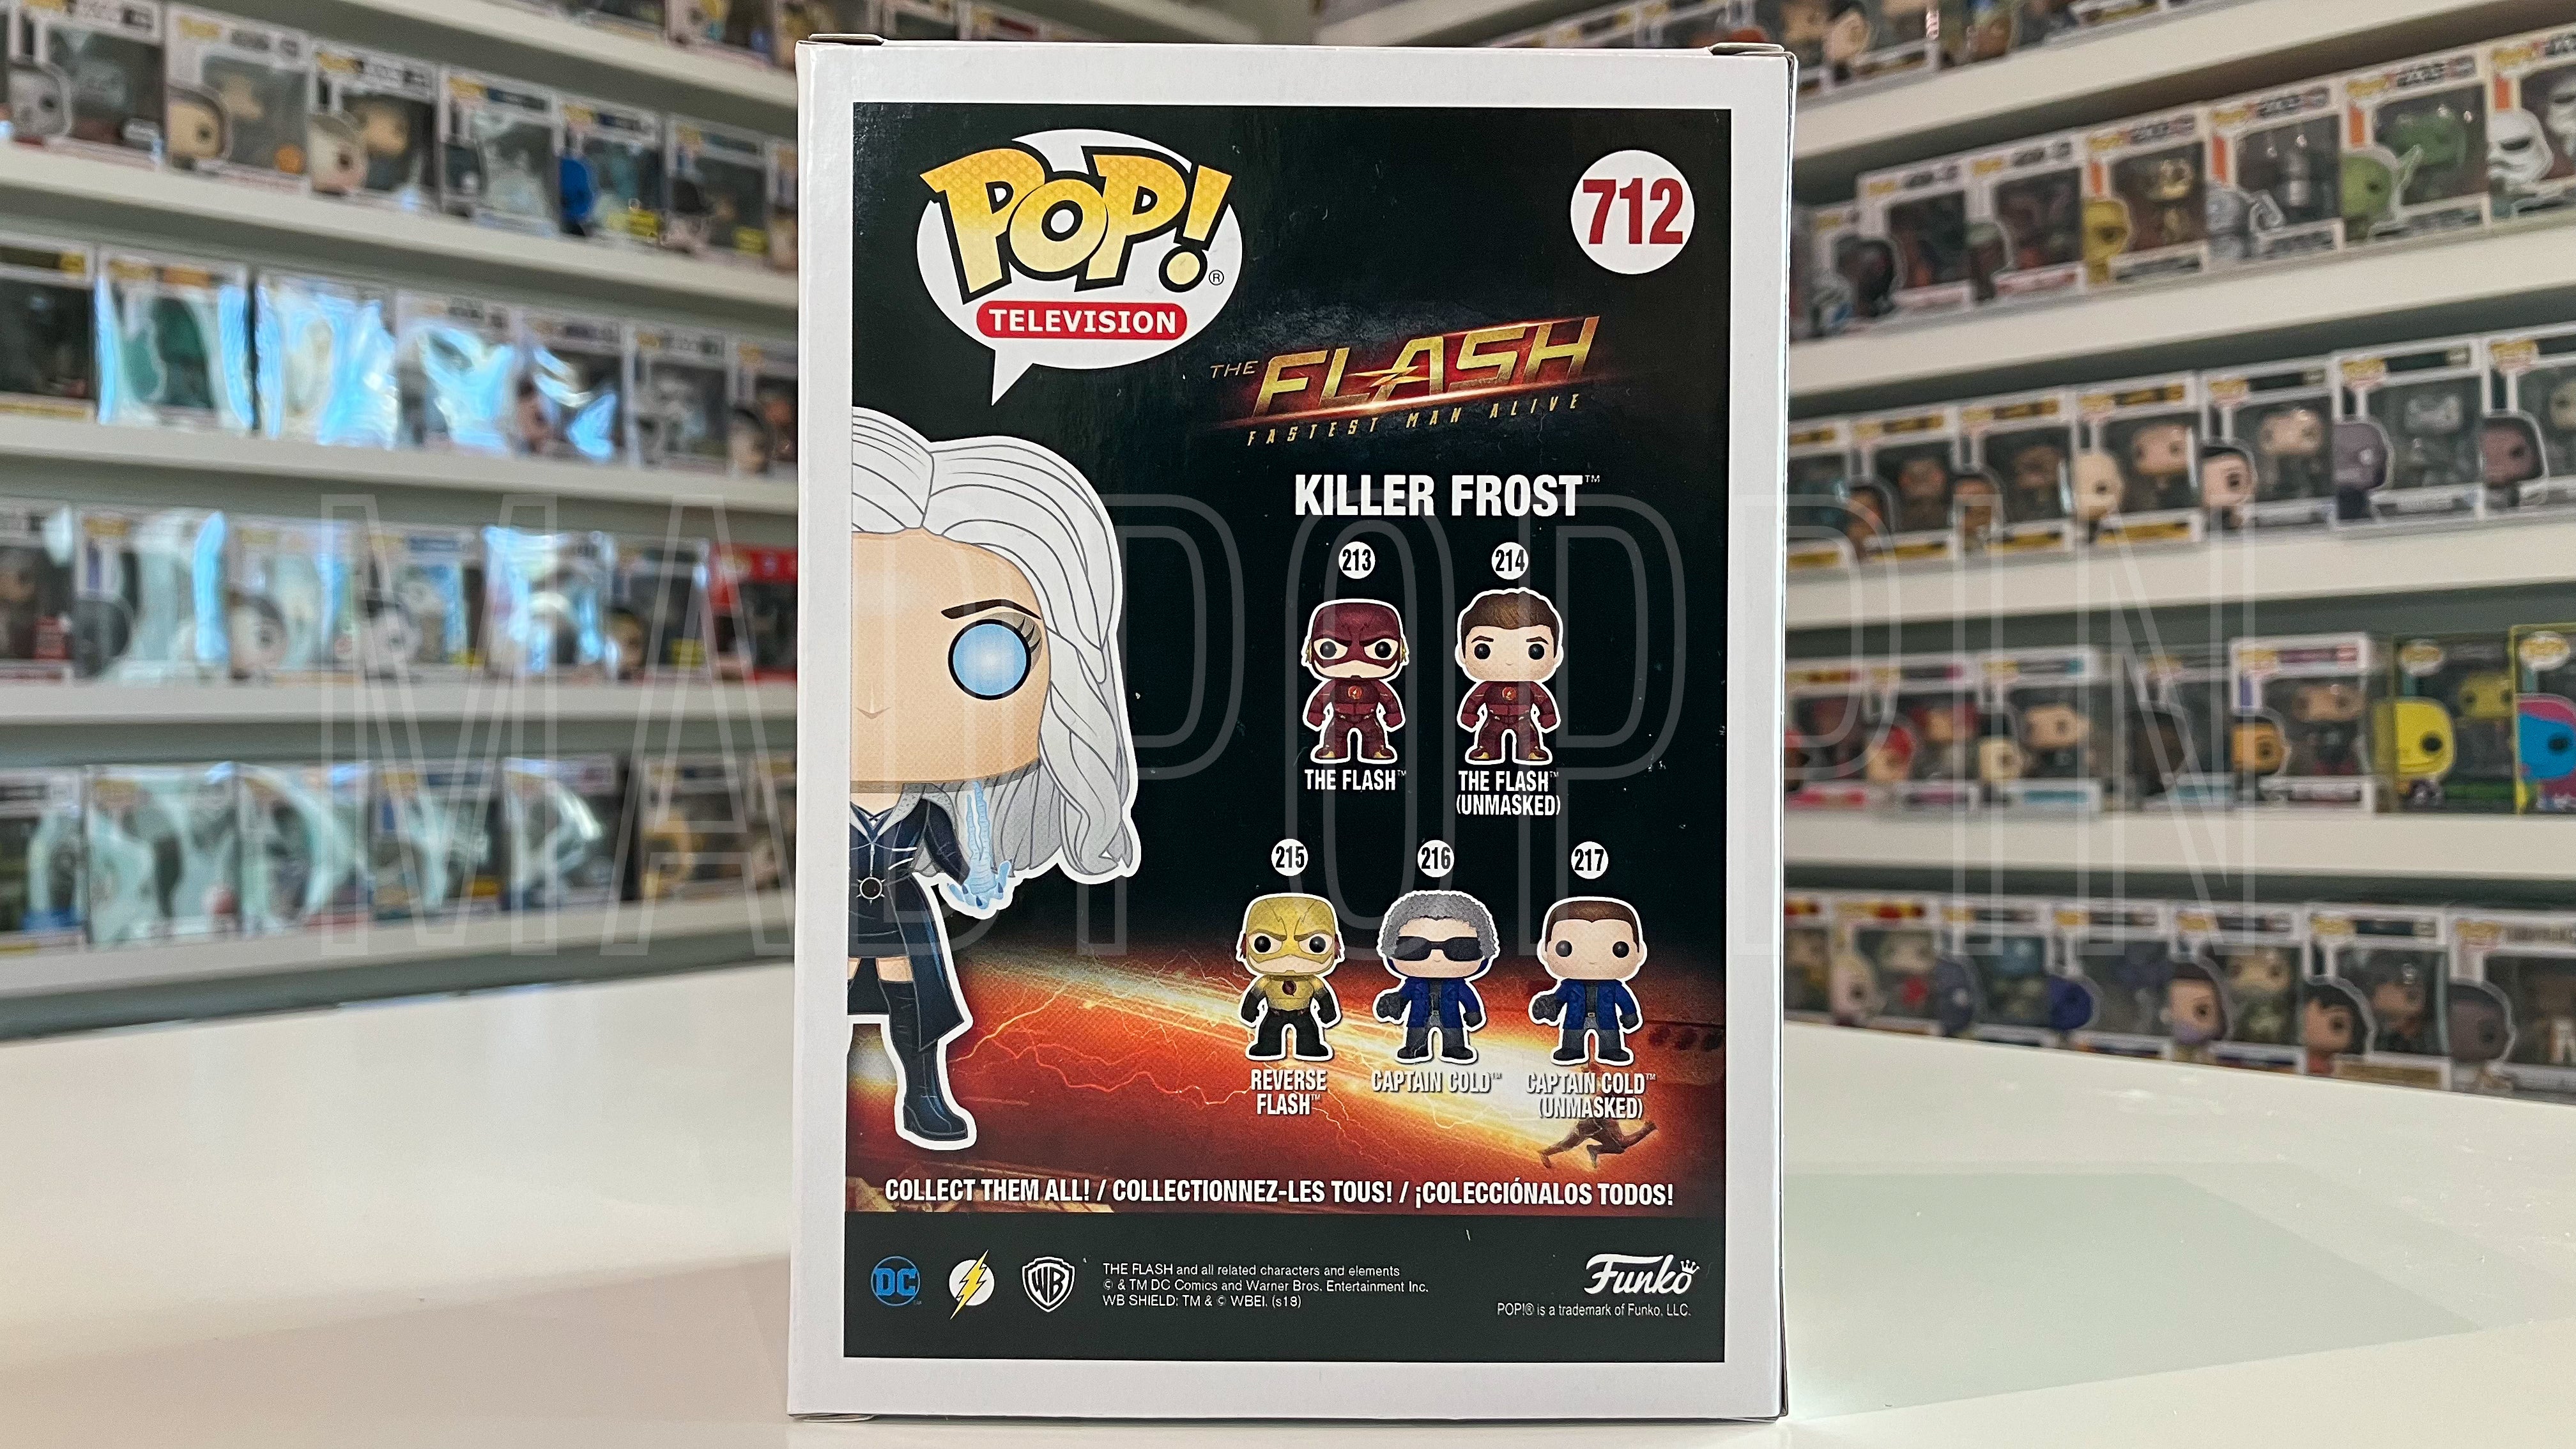 Funko Pop TV The Flash Killer Frost Fall Convention NYCC 712